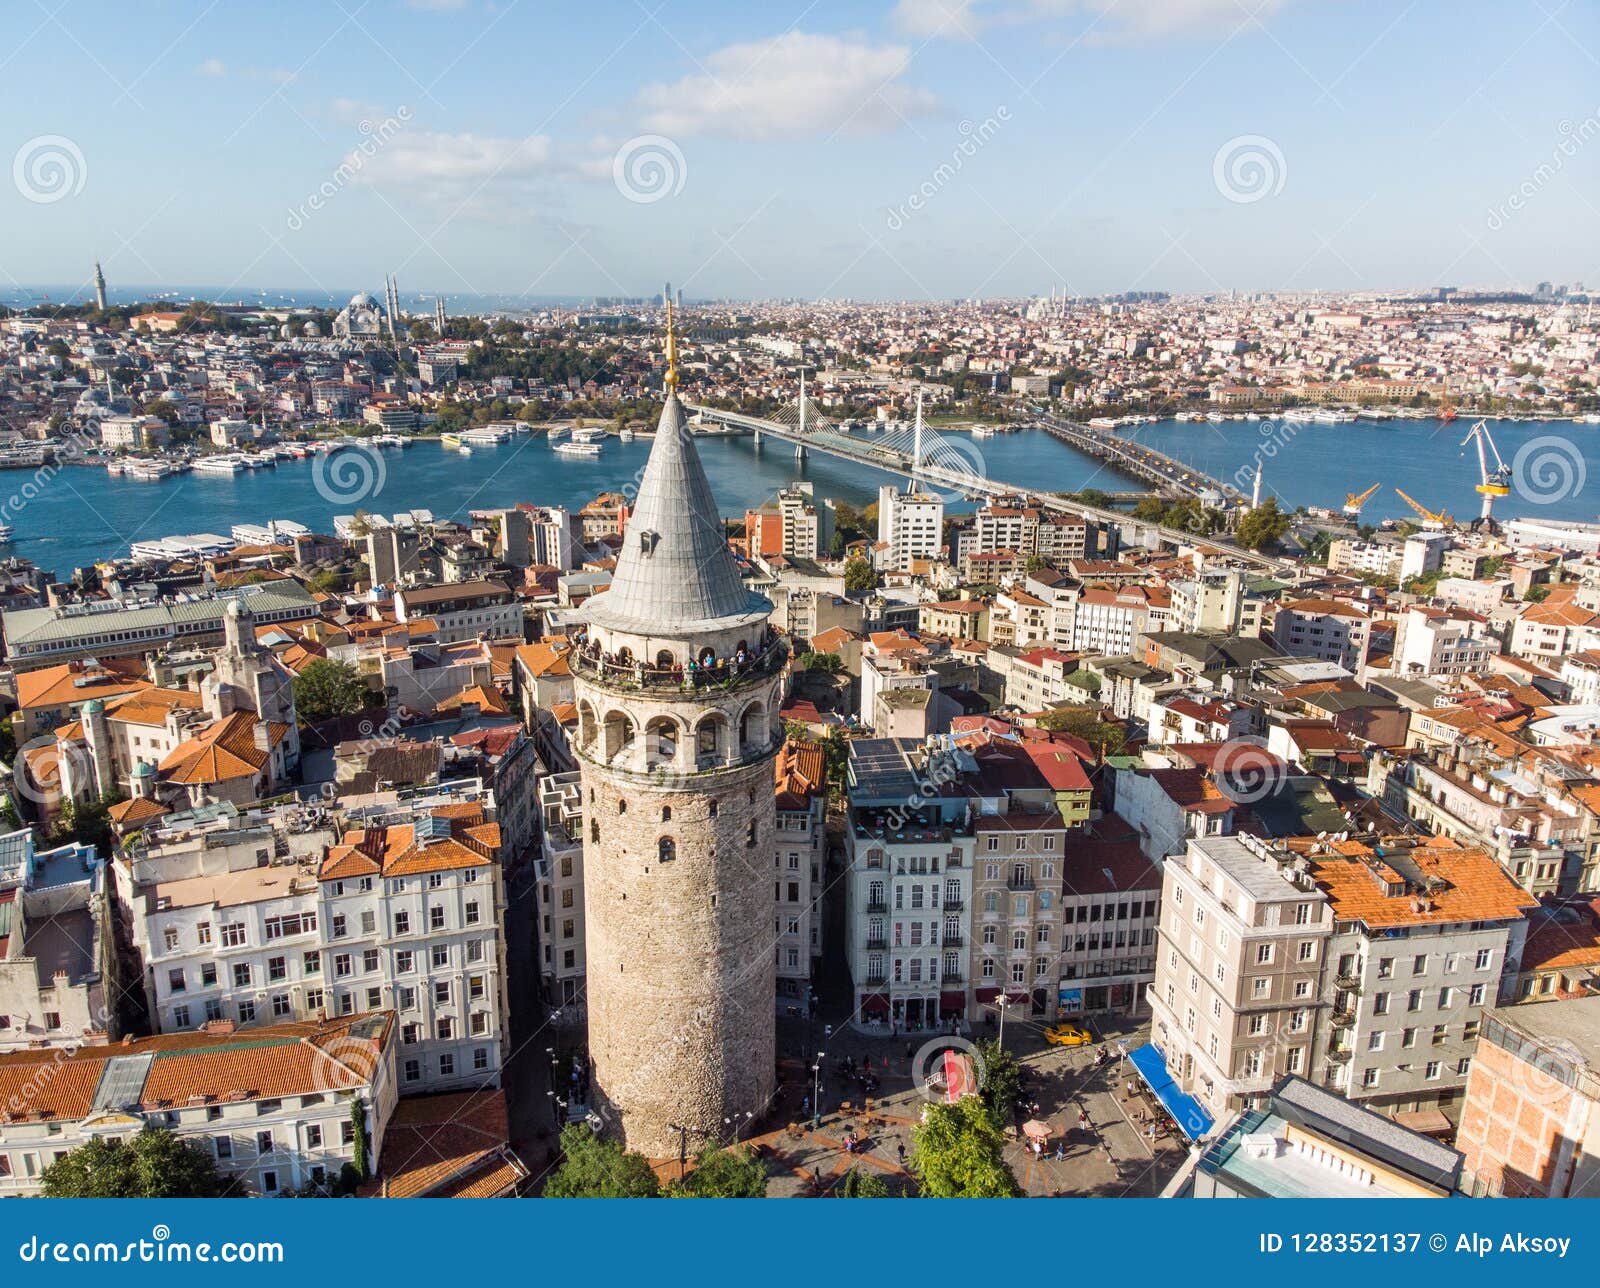 aerial view of galata tower in istanbul / turkey.